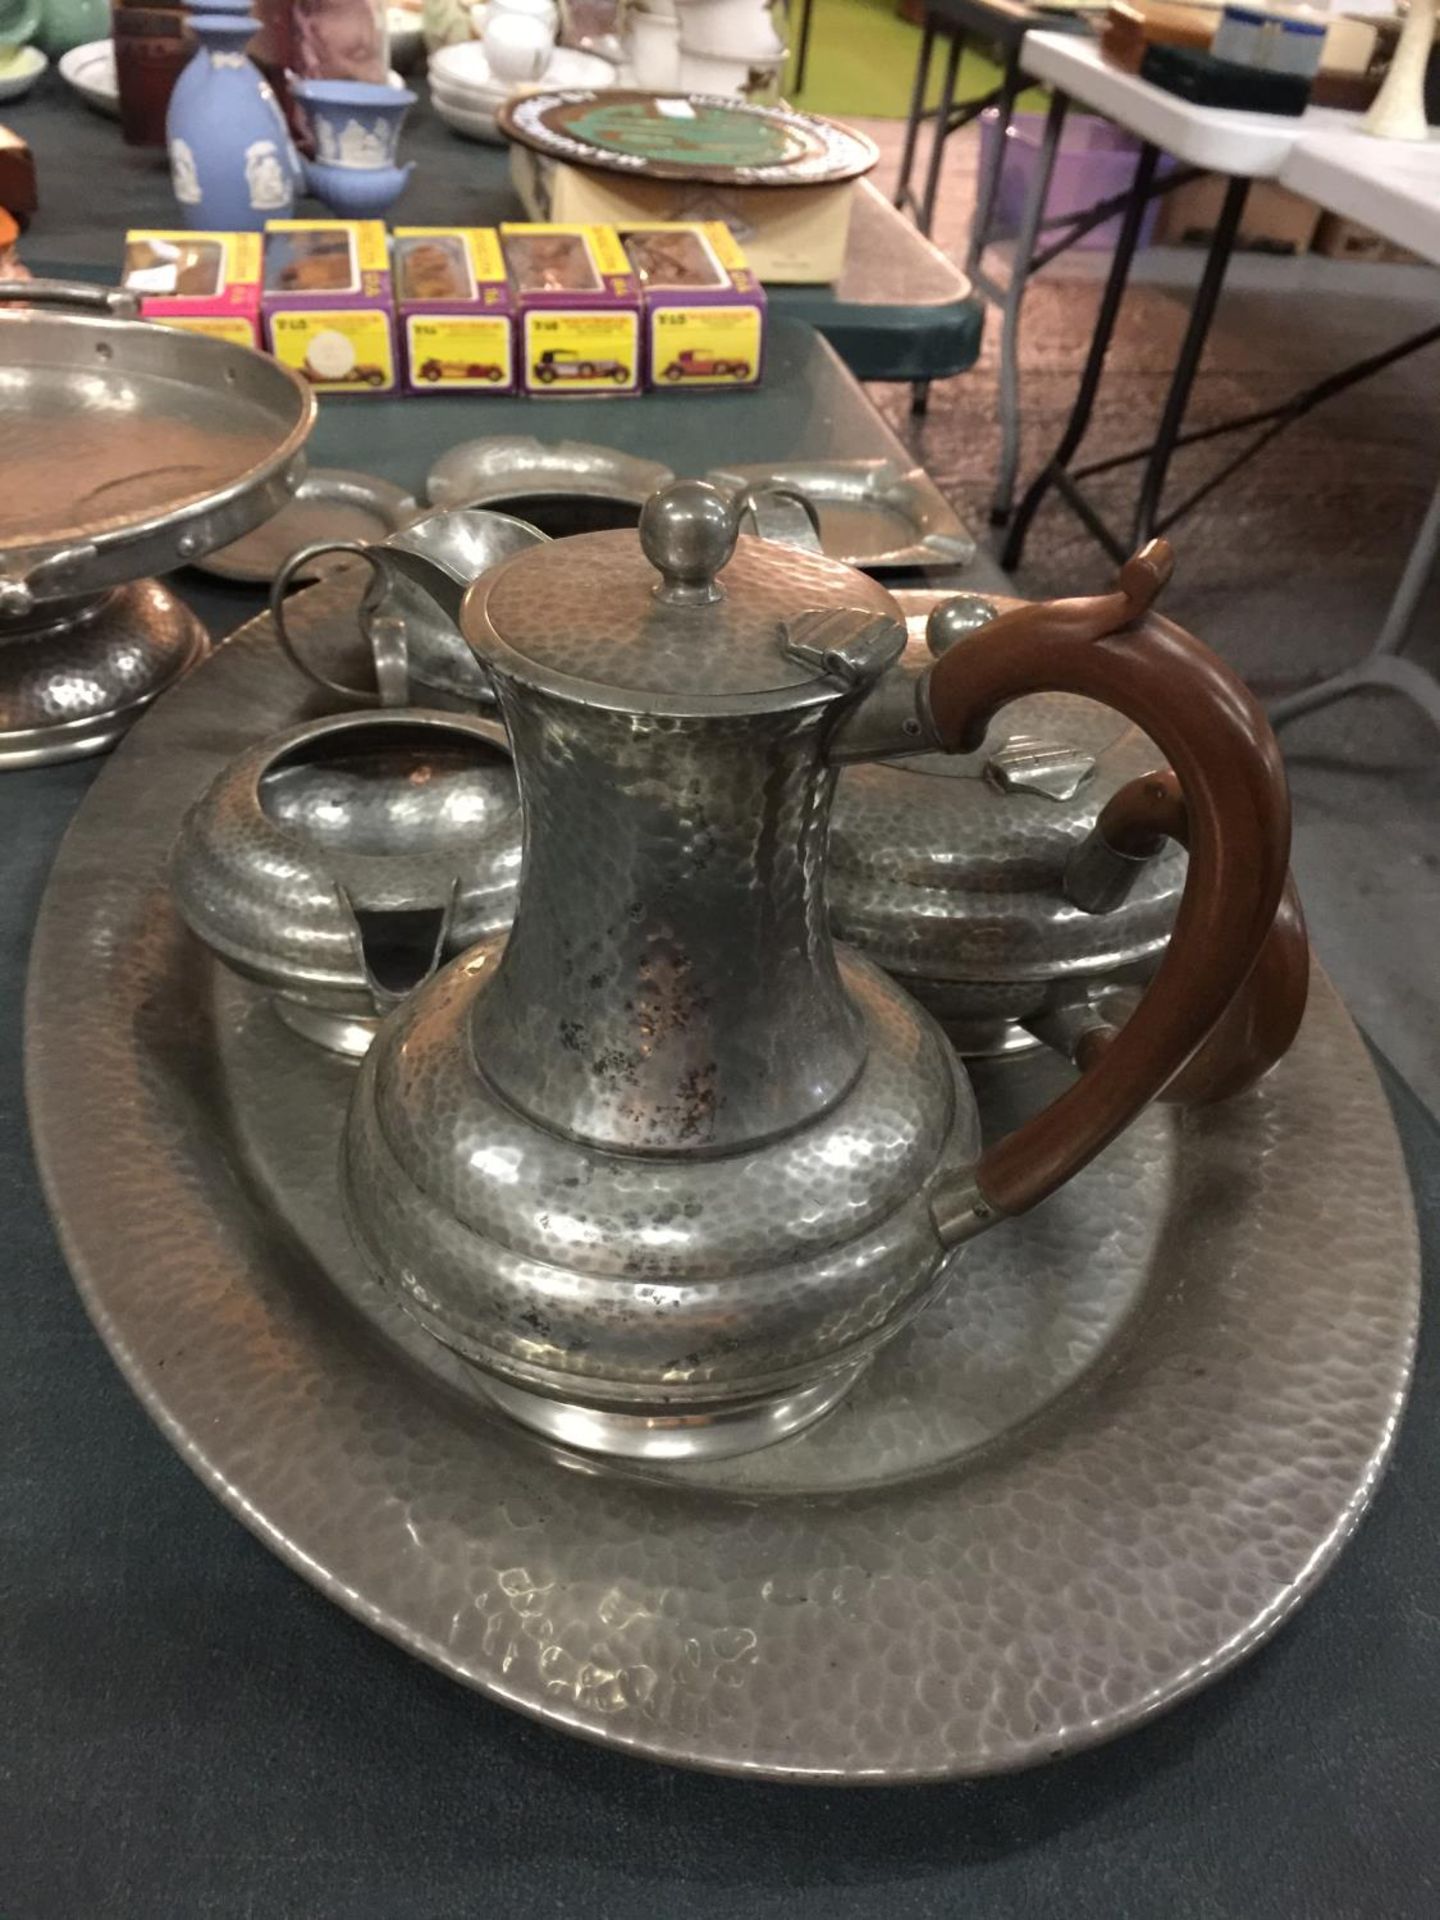 A PEWTER TEASET ON A TRAY, A PLATE ON A STAND AND THREE SMALLER PLATES - Image 4 of 6